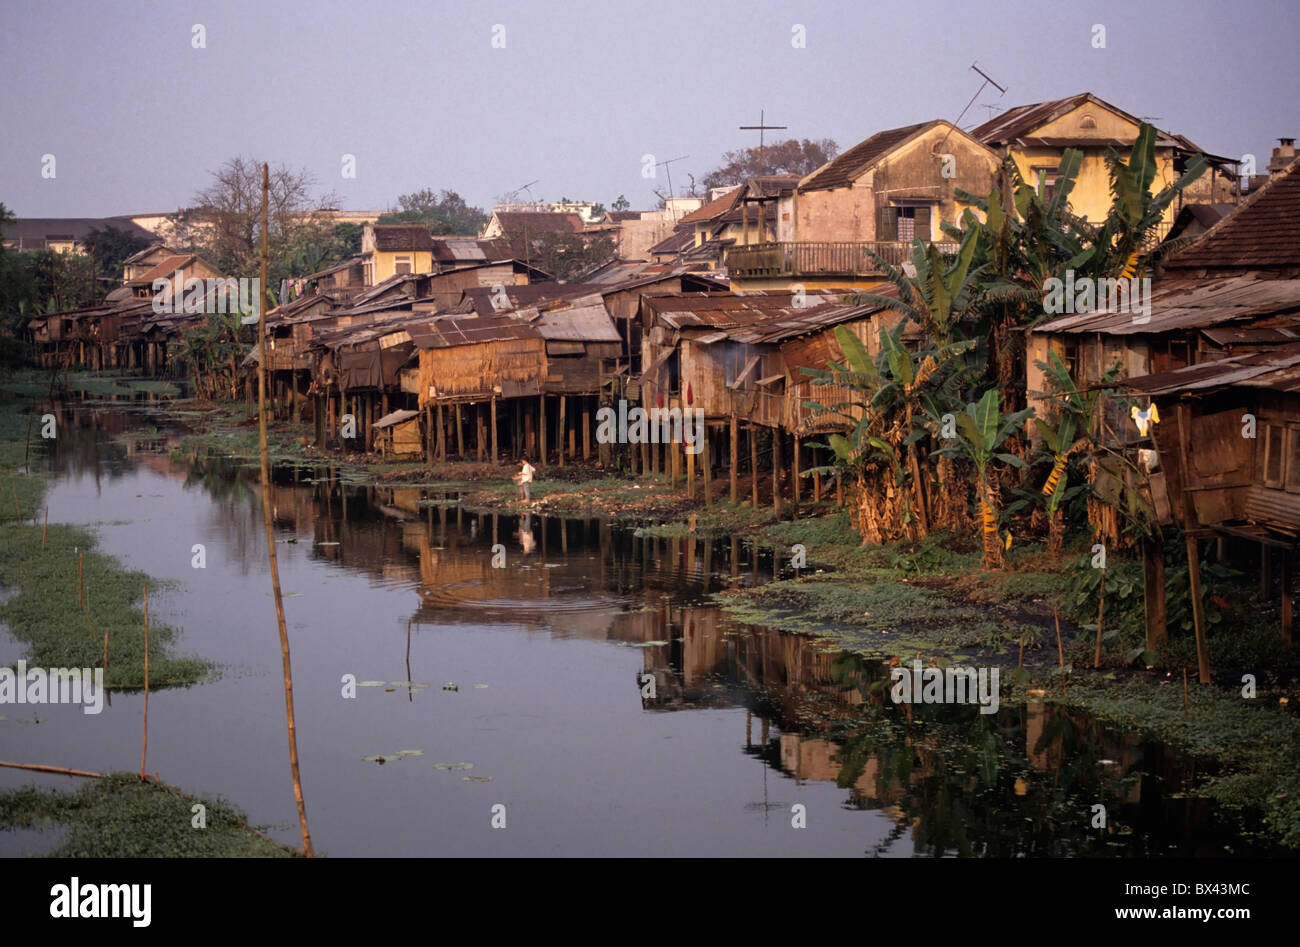 Houses on stilts next to a river, Vietnam - at dusk. Stock Photo